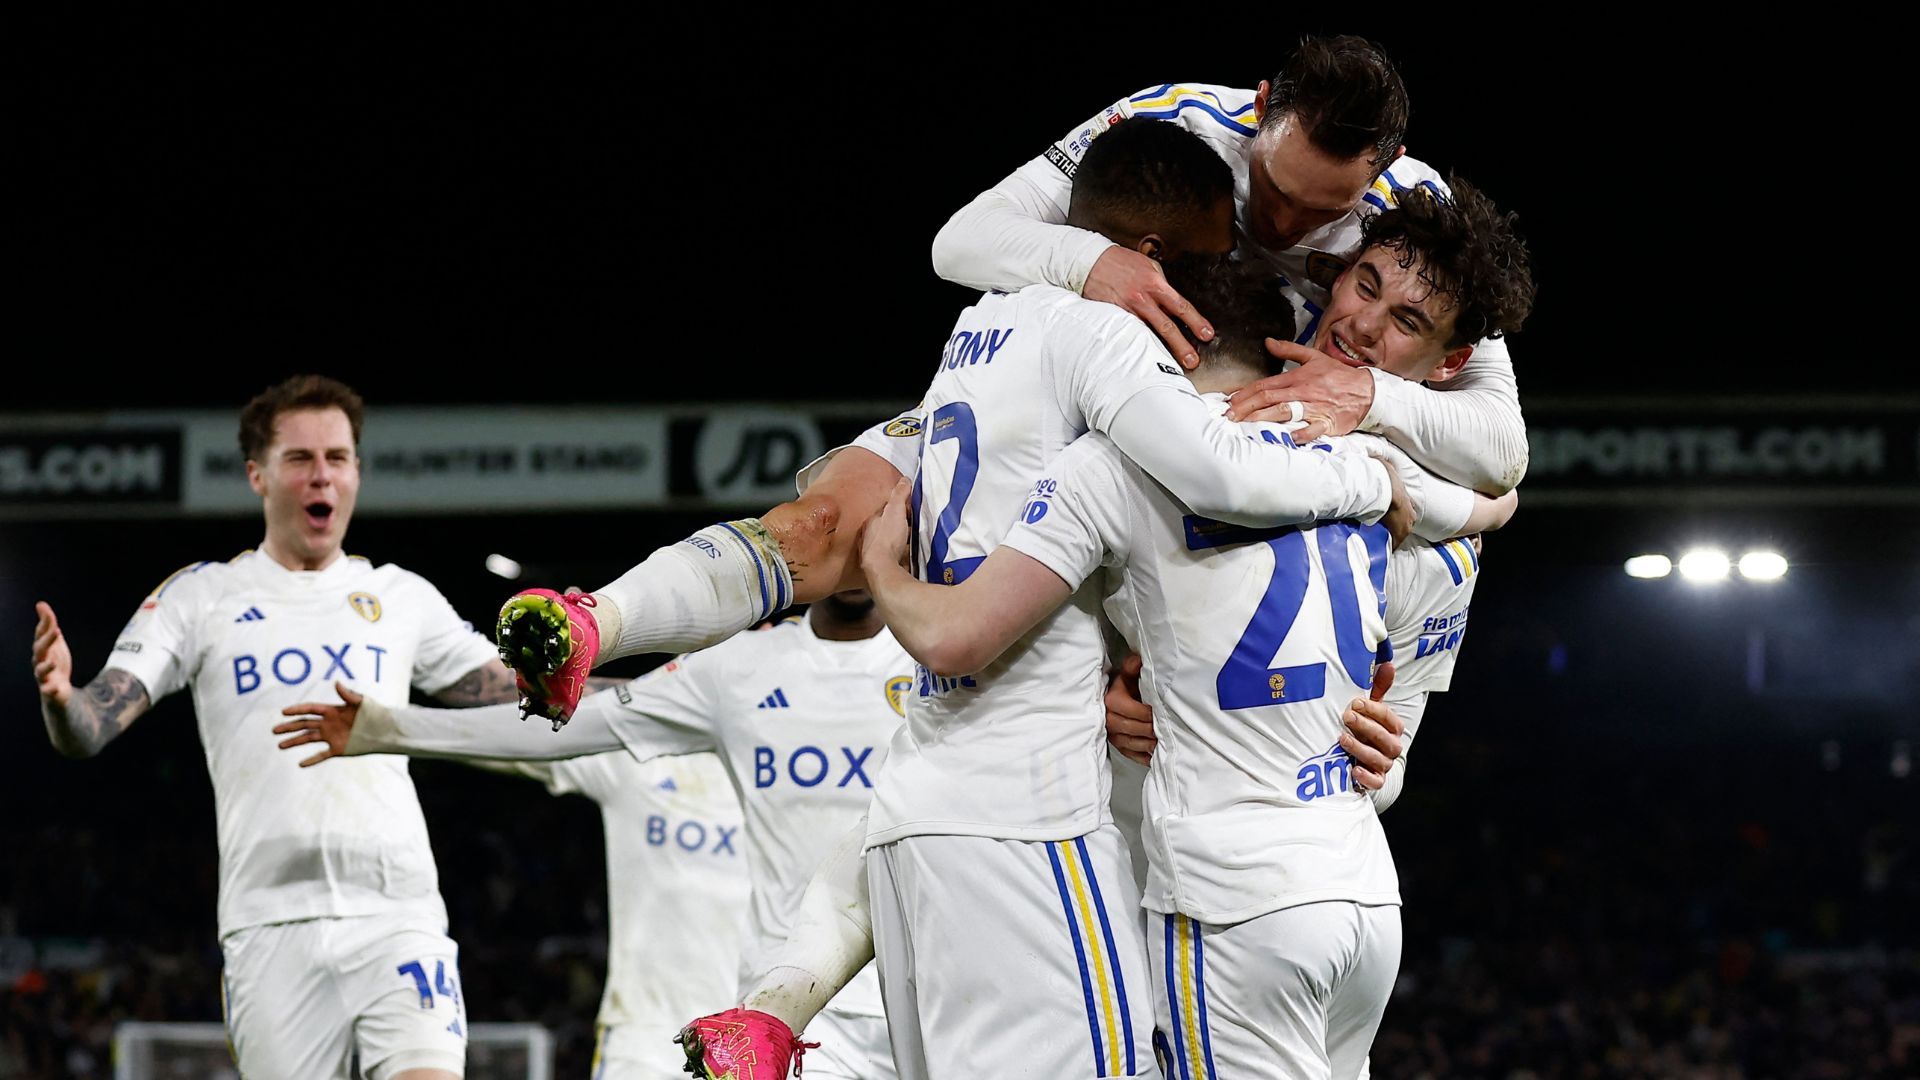 LEEDS UNITED 3-1 LEICESTER CITY